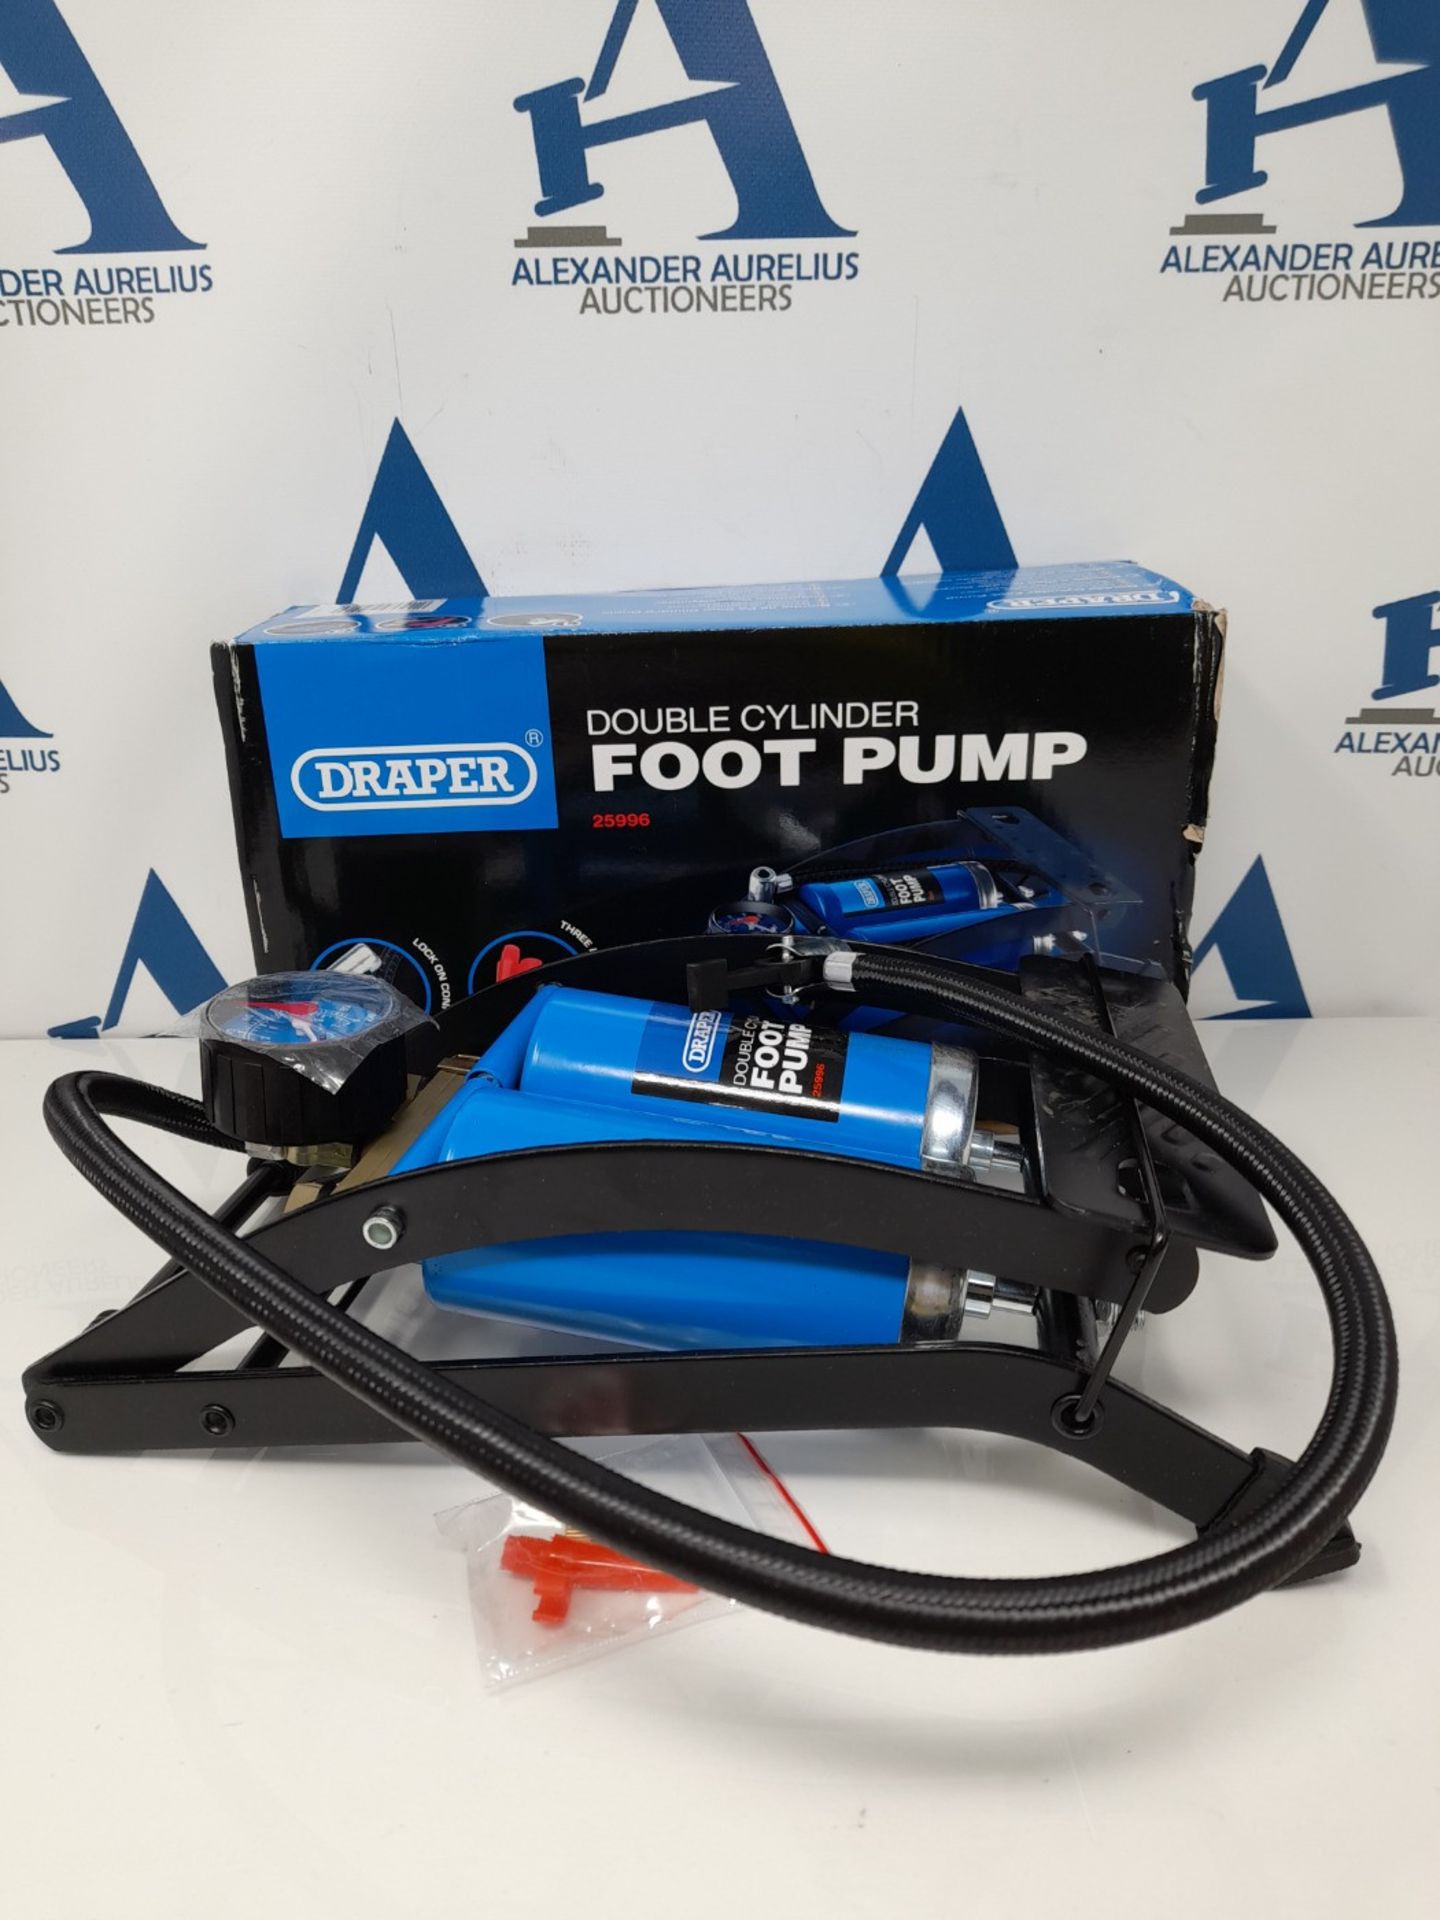 Draper Double-Cylinder Foot Pump with Pressure Gauge & Accessories - 25996 - Manual In